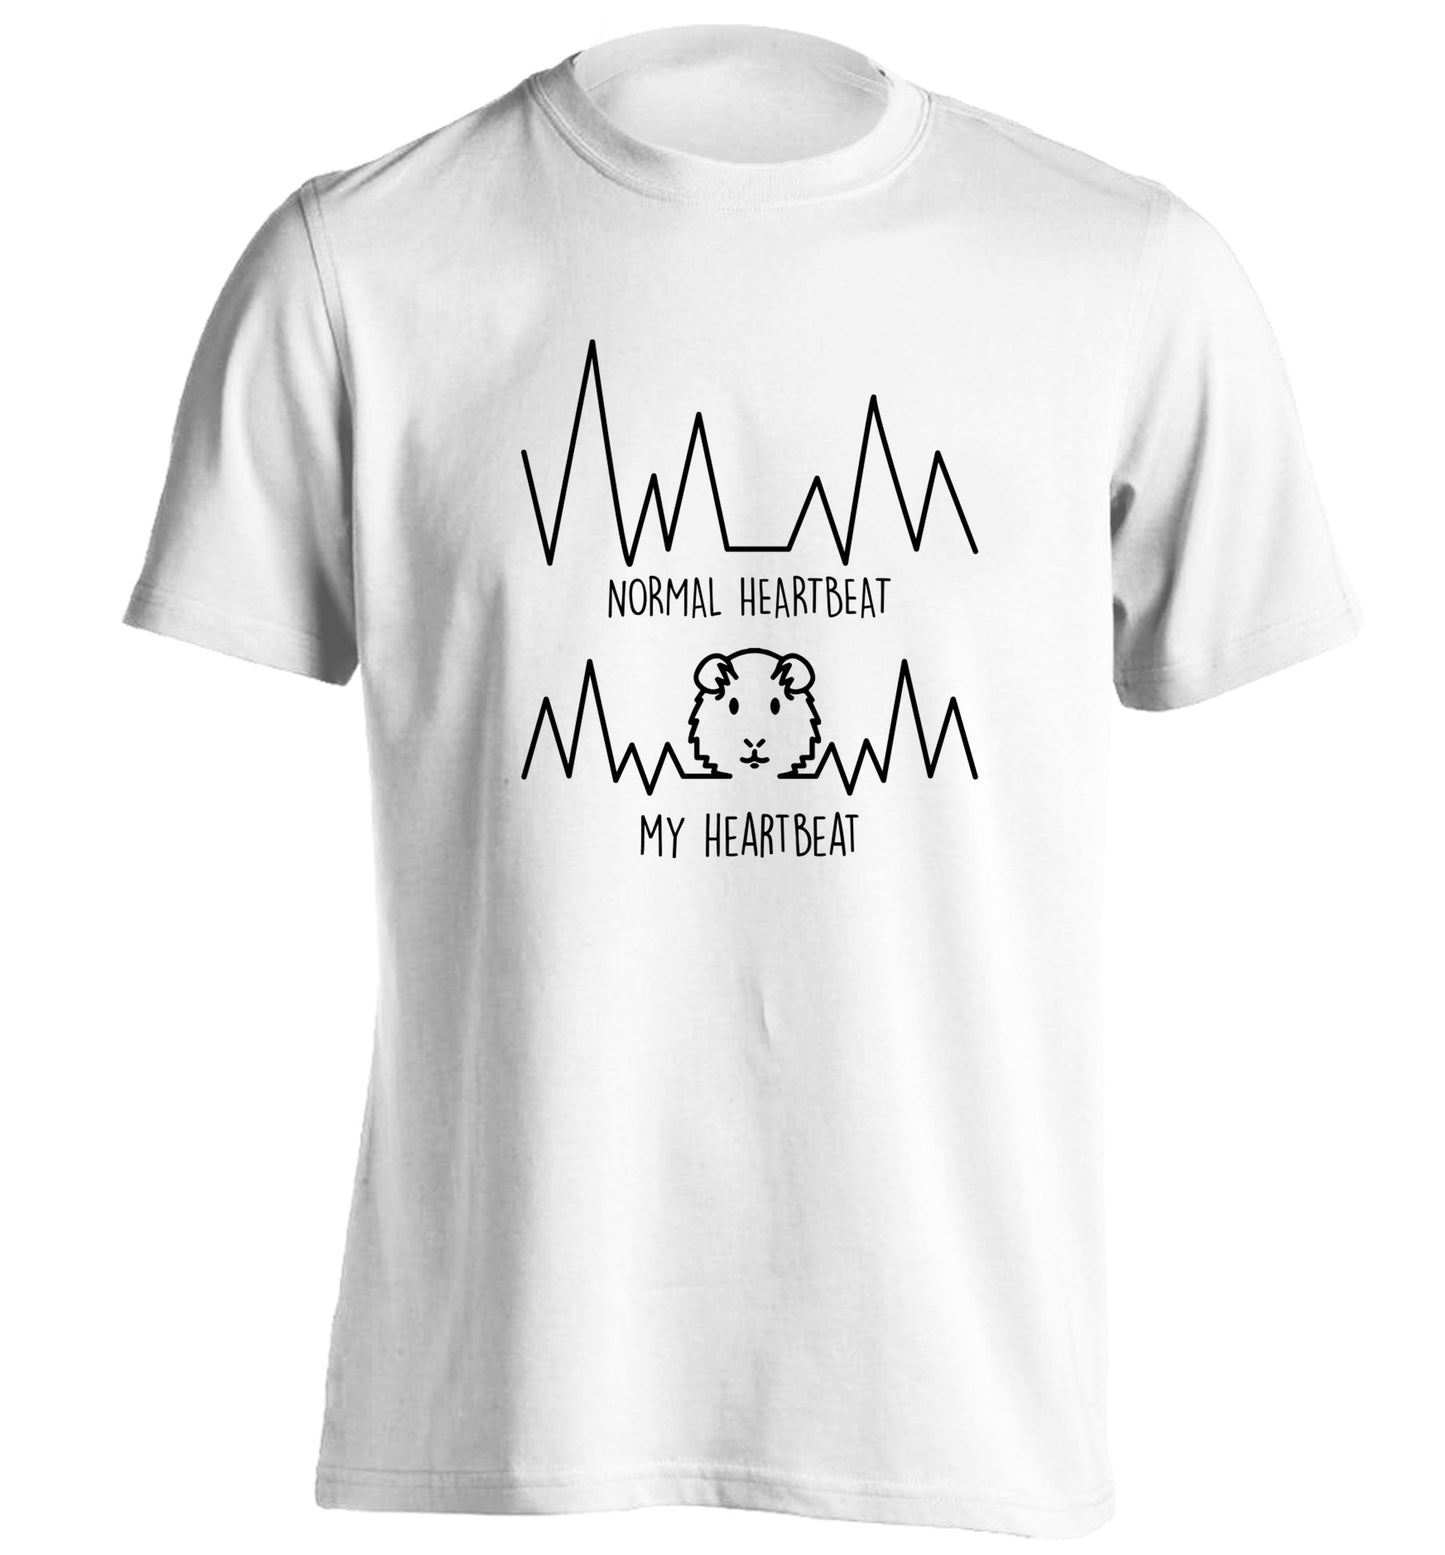 Normal heartbeat vs my heartbeat guinea pig lover adults unisex white Tshirt 2XL